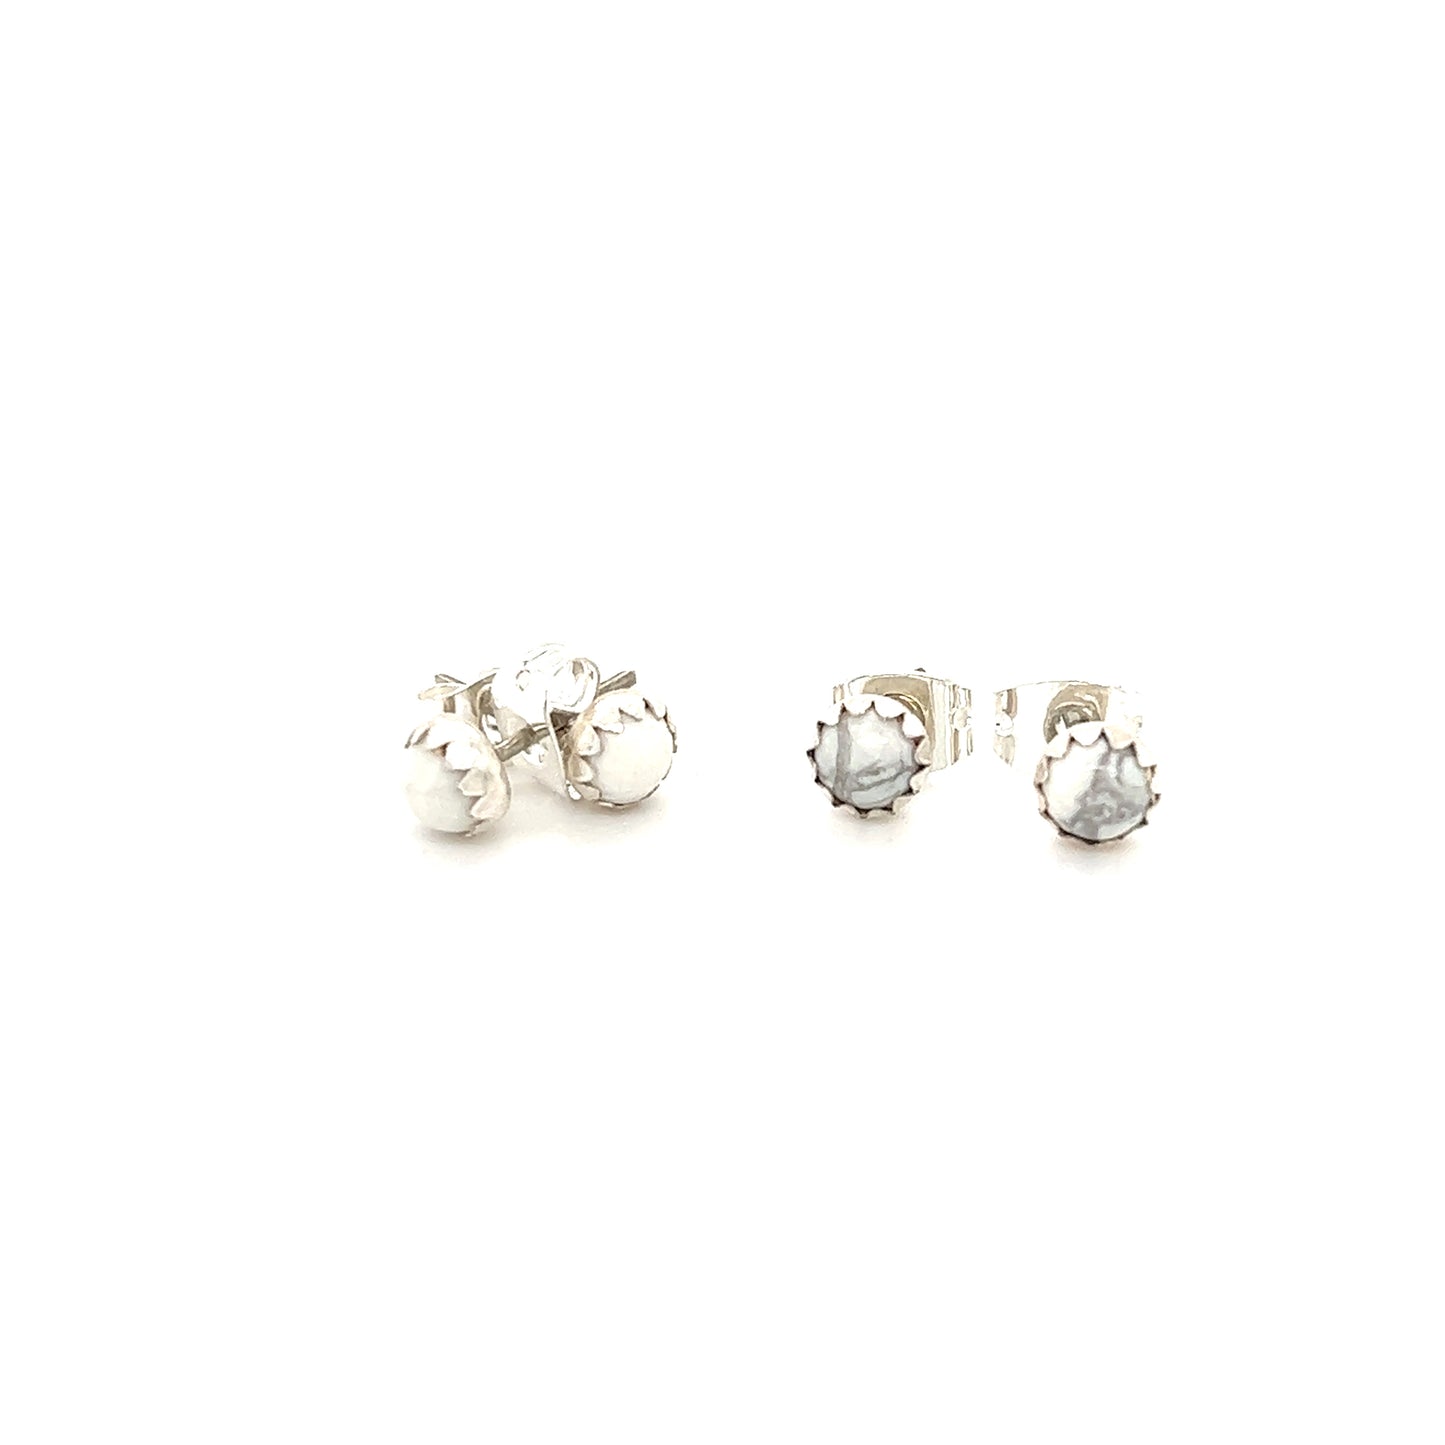 Delicate Super Silver handcrafted White Buffalo studs with a Native American vibe, showcased on a white surface.